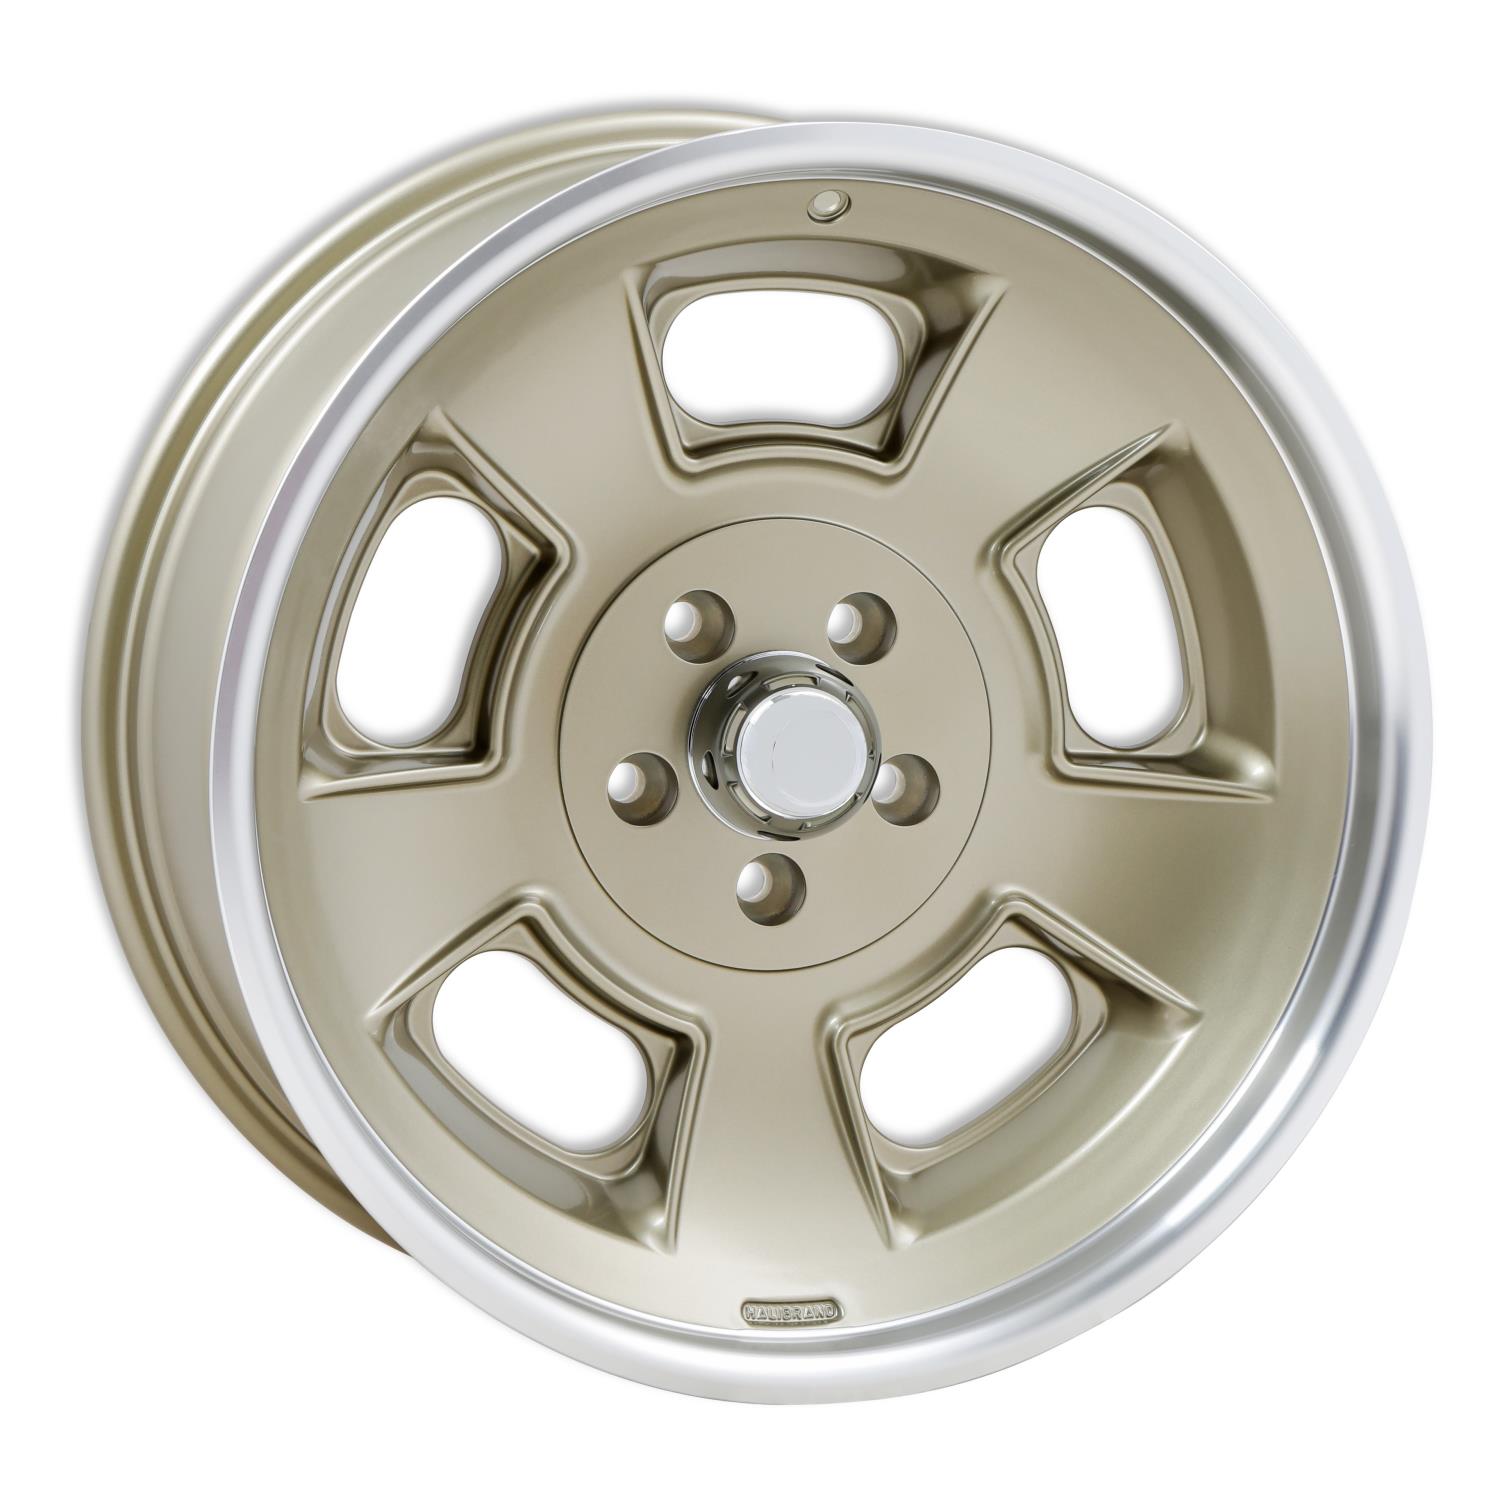 Sprint Front Wheel, Size: 20x8.5", Bolt Pattern: 5x5", Backspace: 4.5" [MAG7 with Machined Lip - Semi Gloss Clearcoat]